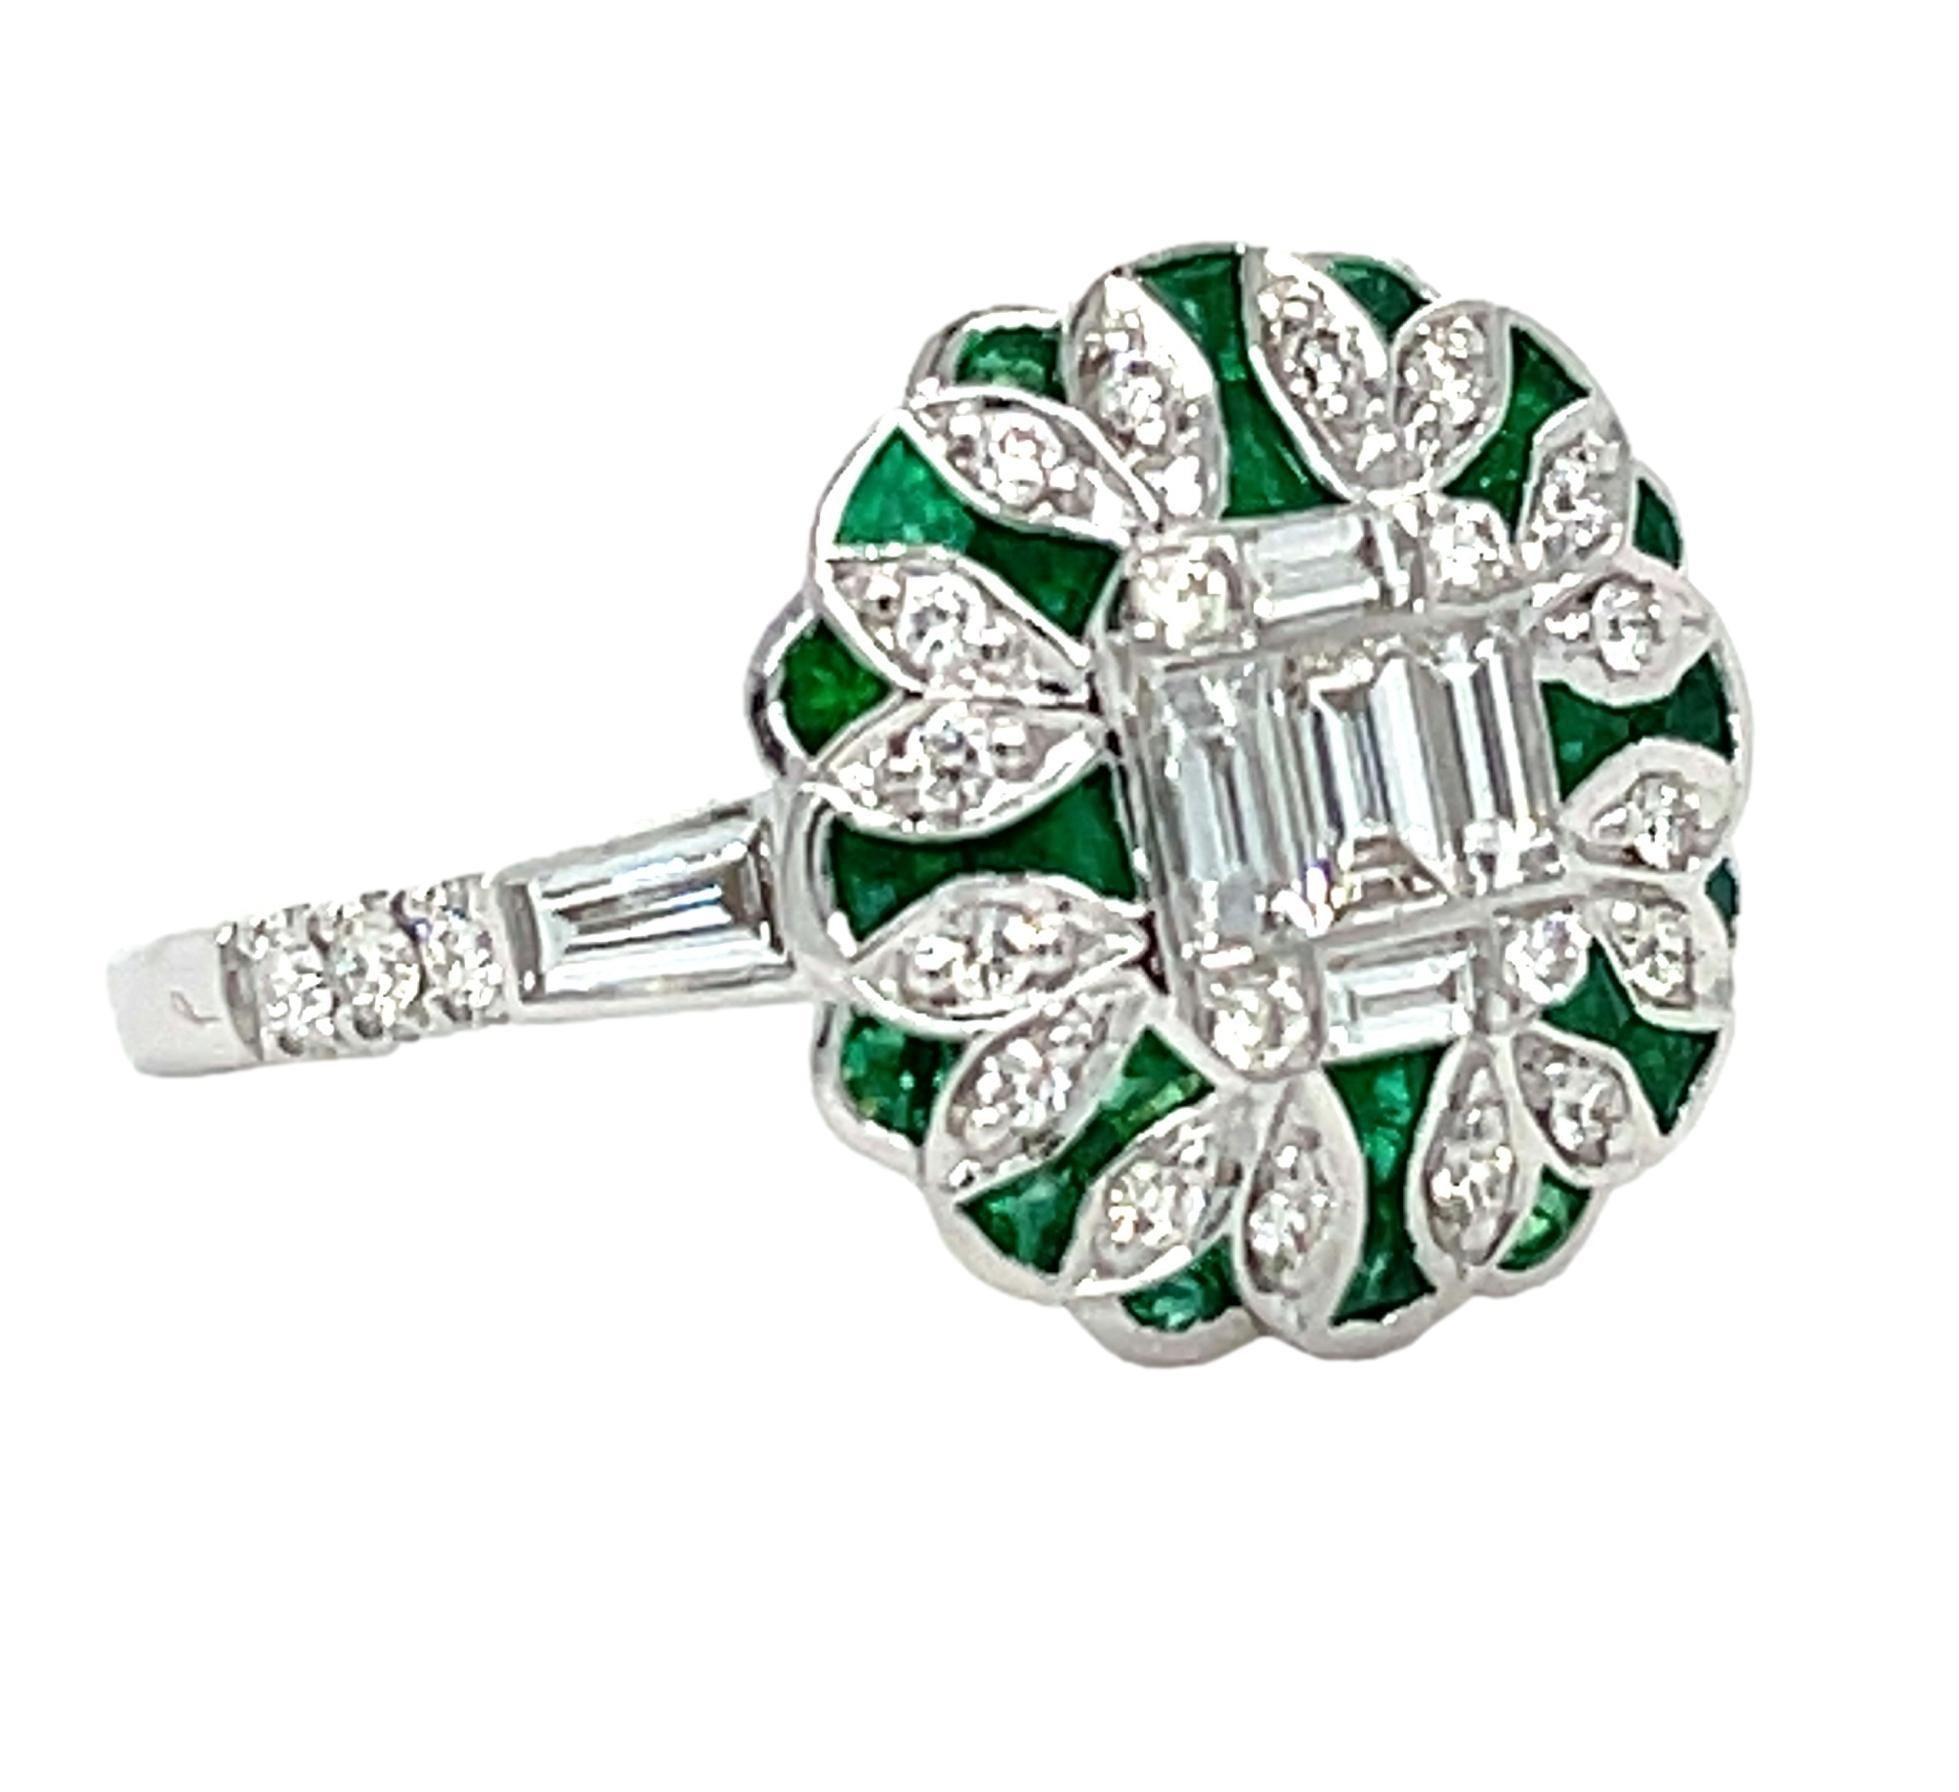 This stunning ring has natural Emerald and Diamonds set in 18 karat white gold. There are sparkling tapered and round diamonds on the shank for a delicate accent. This ring will be shipped in a beautiful box, ready for the perfect gift! The ring is